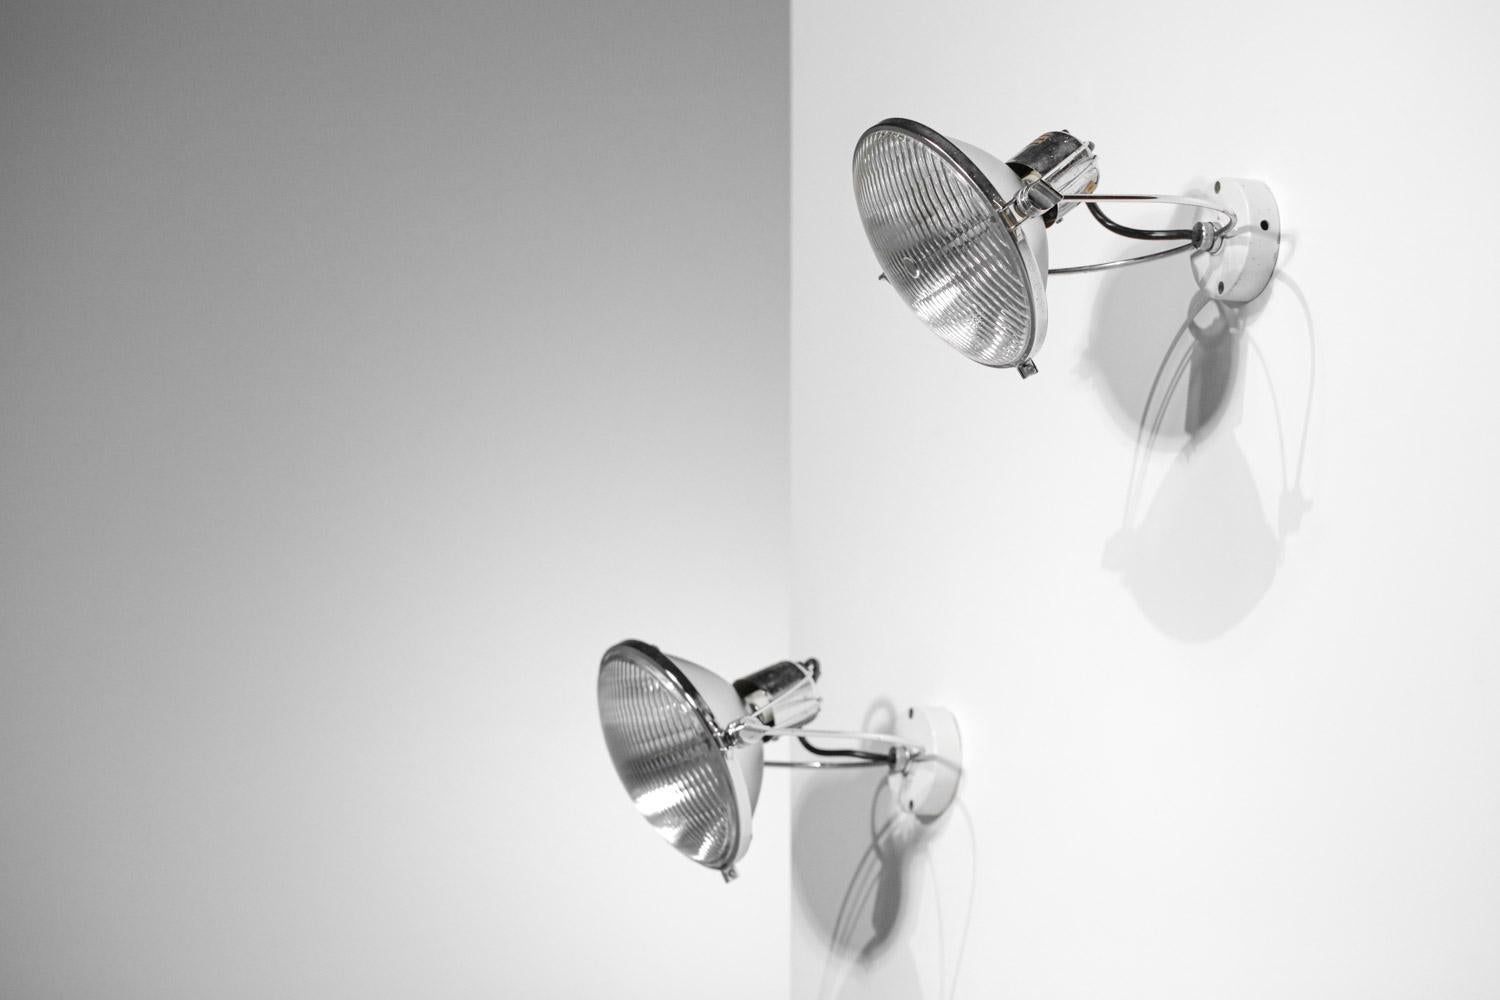 Pair of vintage Italian wall lamps from the 60's in the style of Achille Castiglioni's work. Very original wall lamps by their design and their very modern look for the time. Chromed metal structure, adjustable lampshade and composed of a